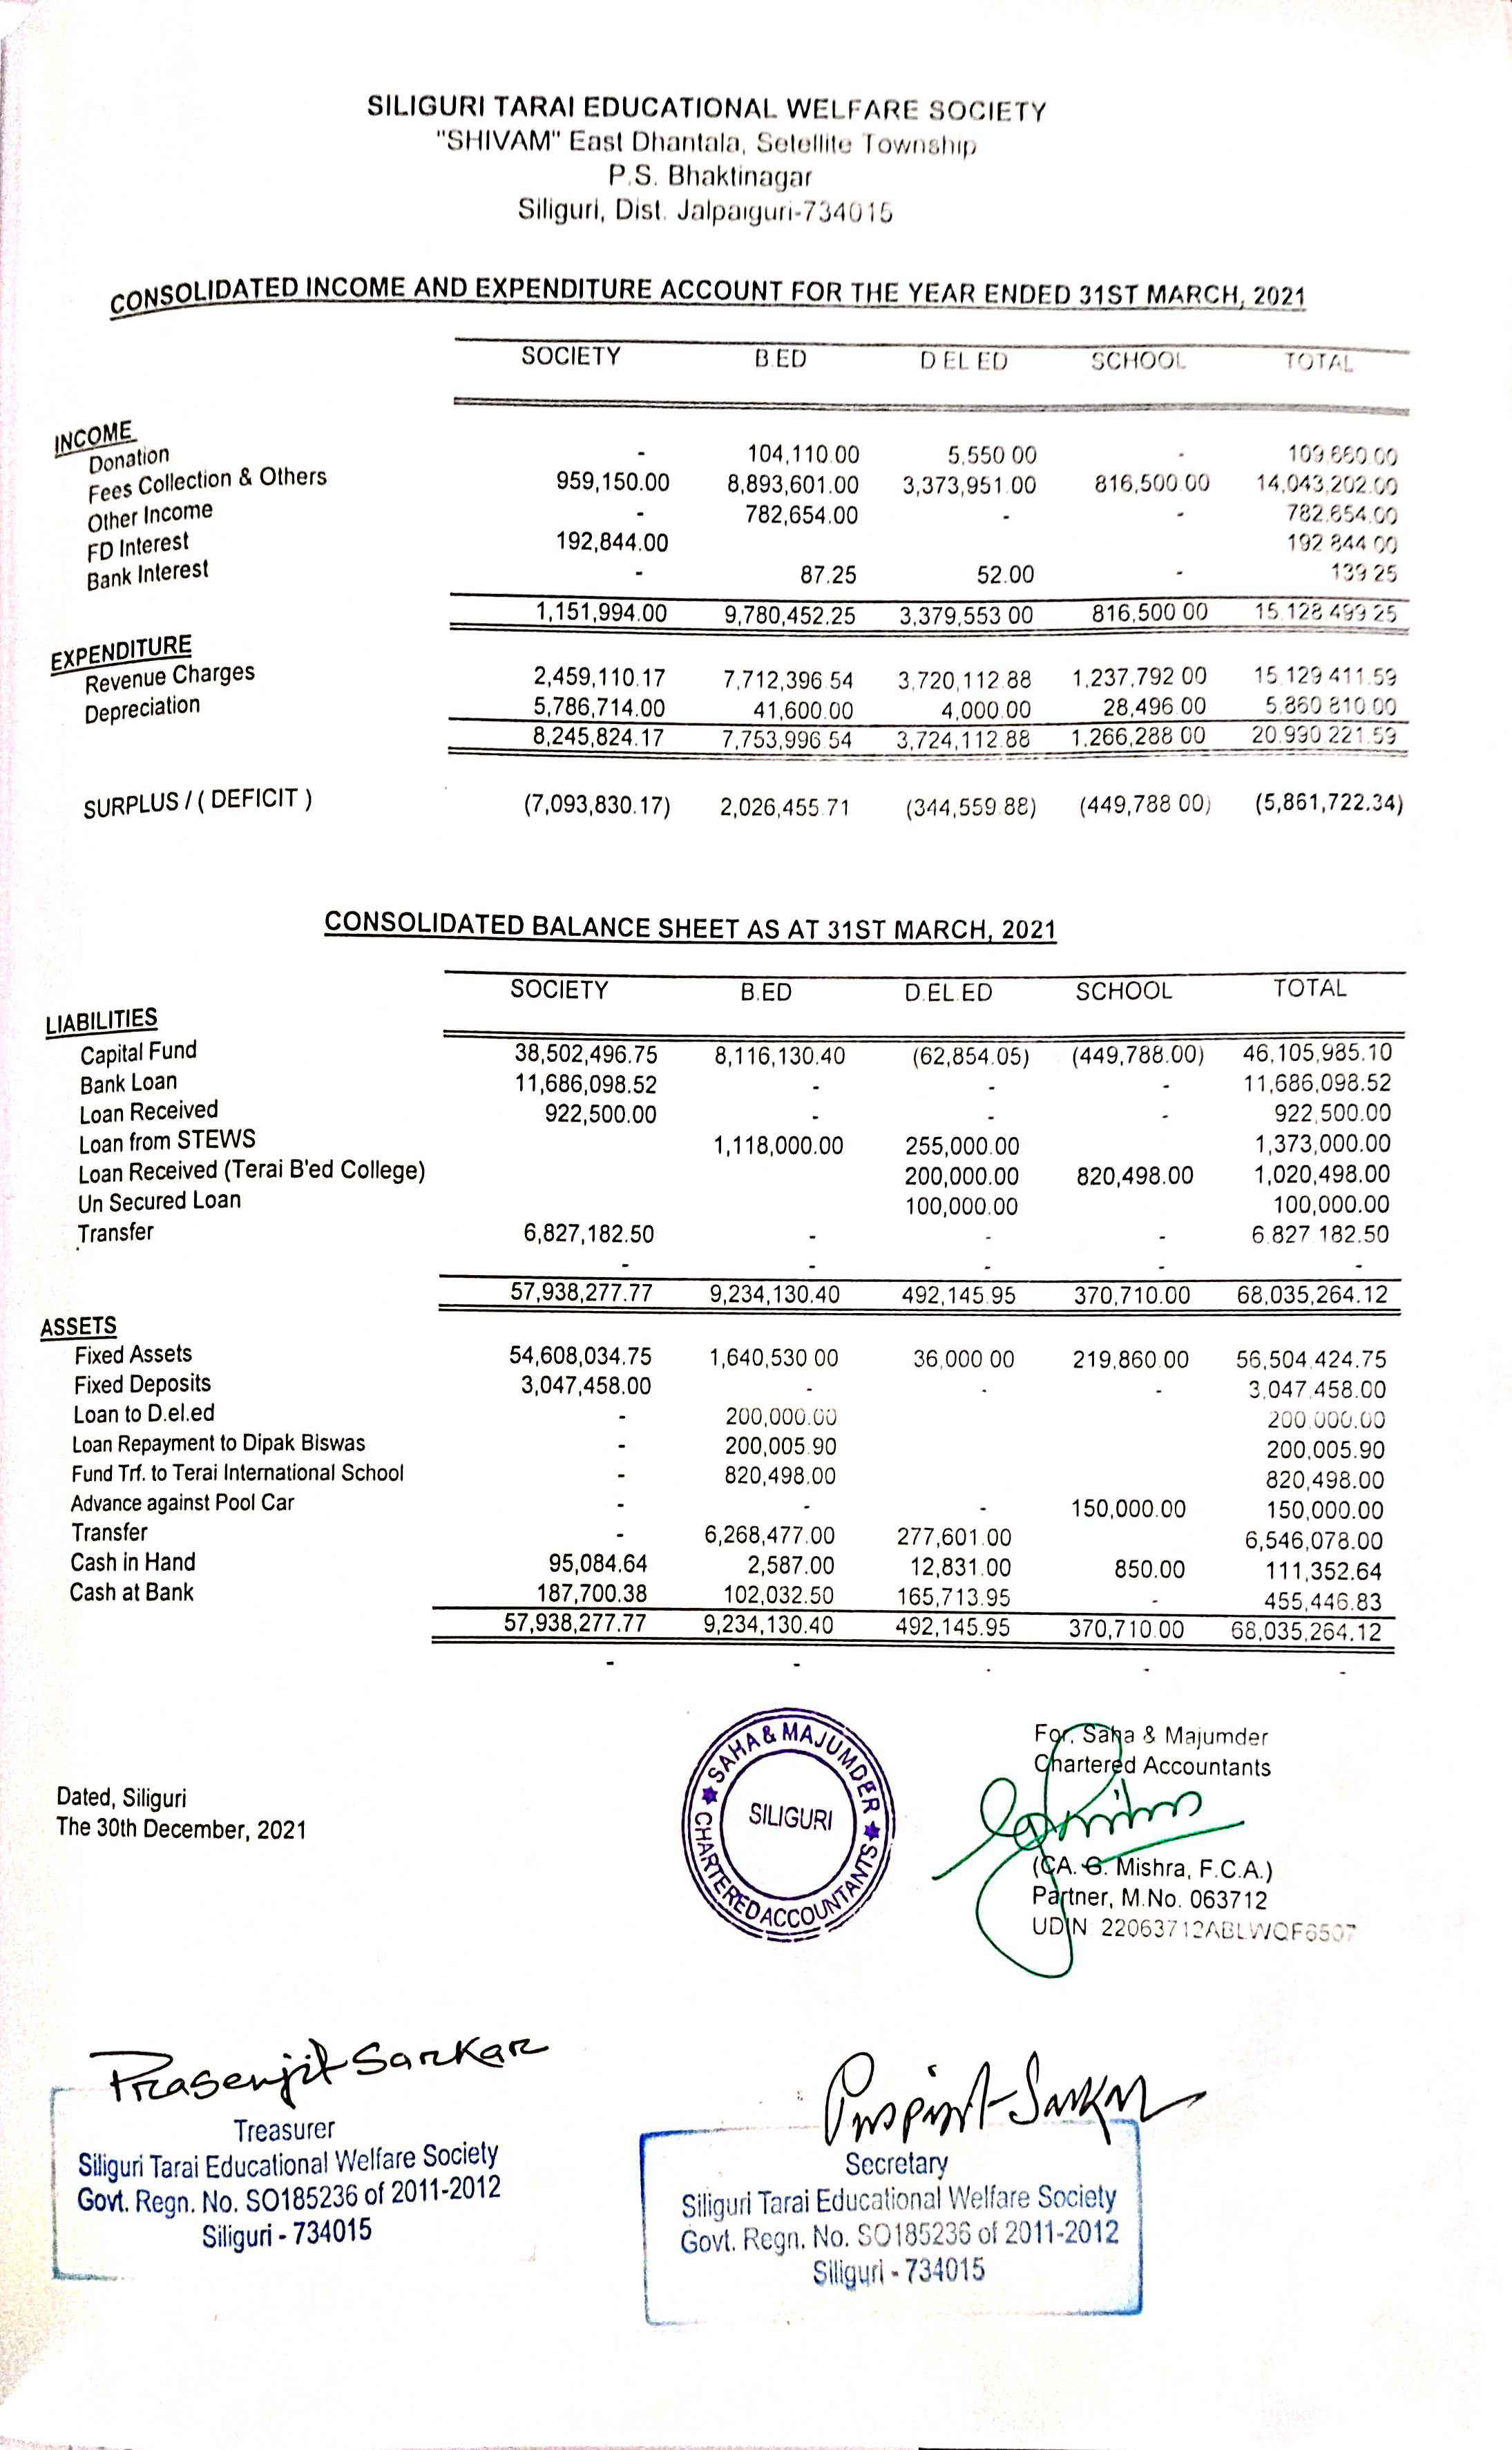 Consolidated Income and Expenditure Account for the year ended 31st march, 2021